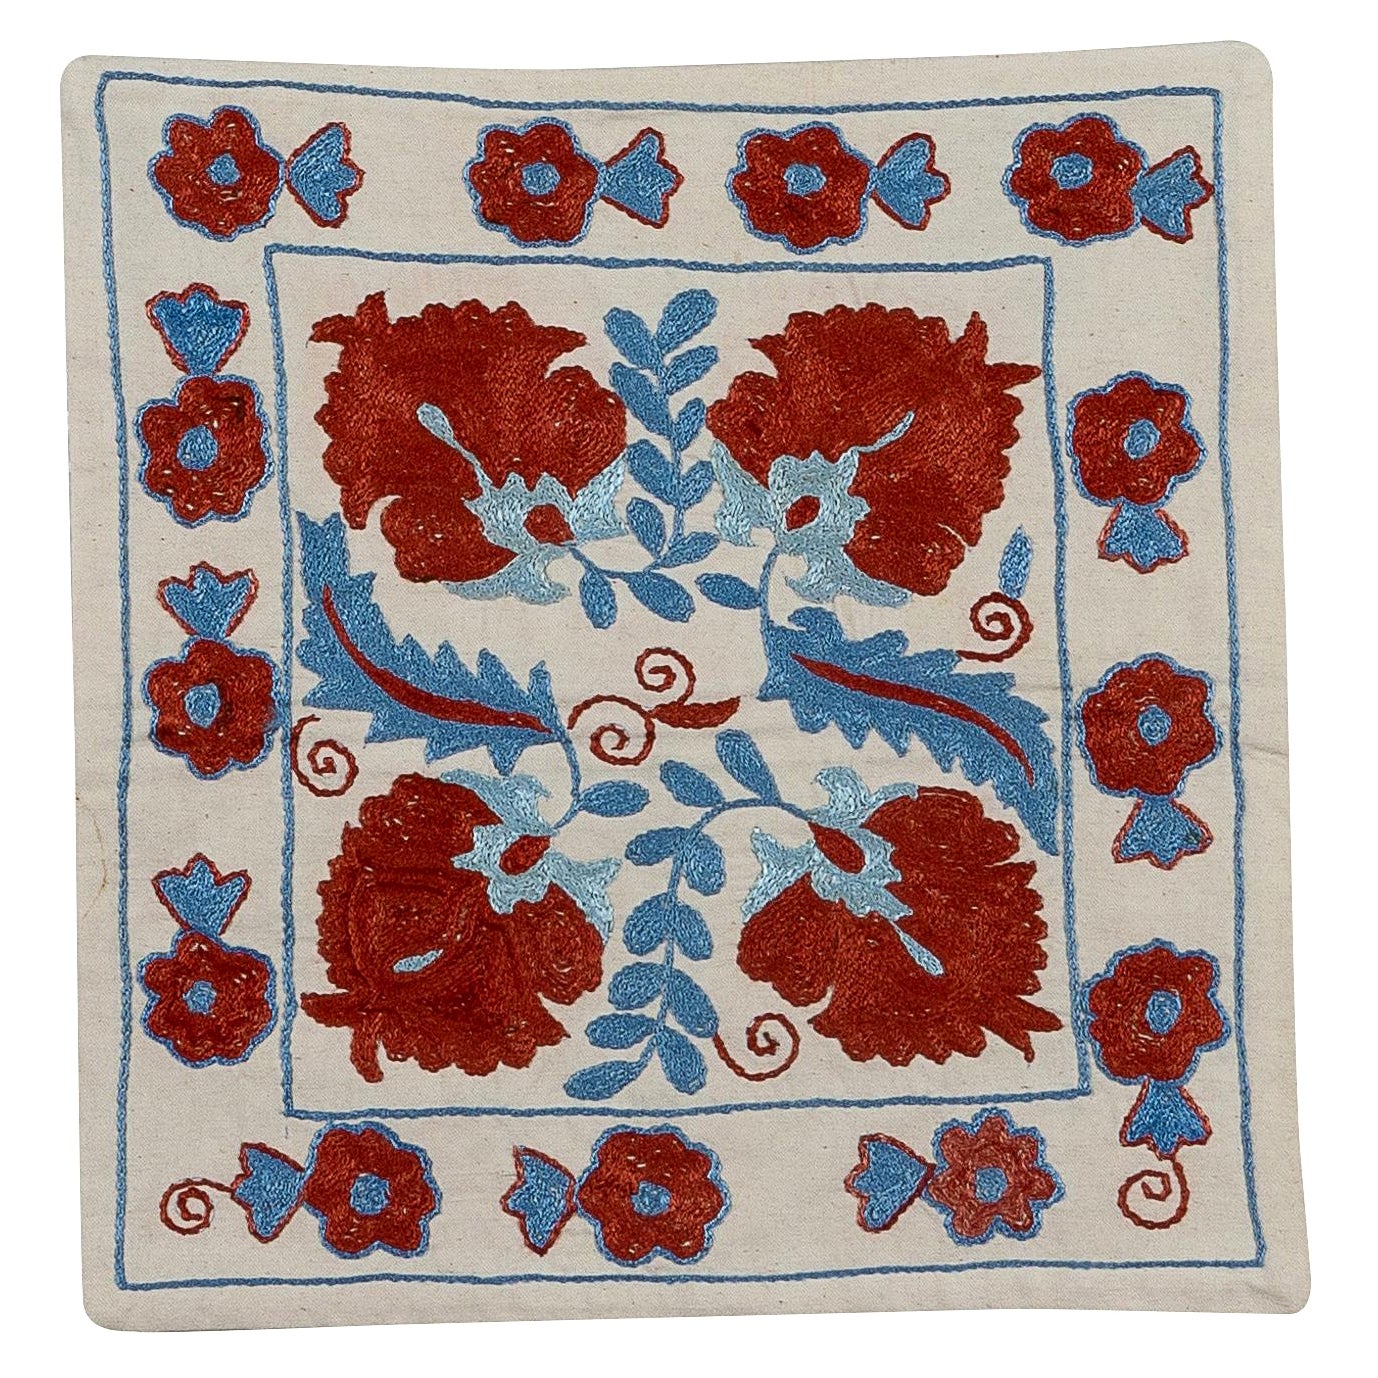  18"x24" New Uzbek Silk Embroidery Cushion Cover in Red, Blue and Cream